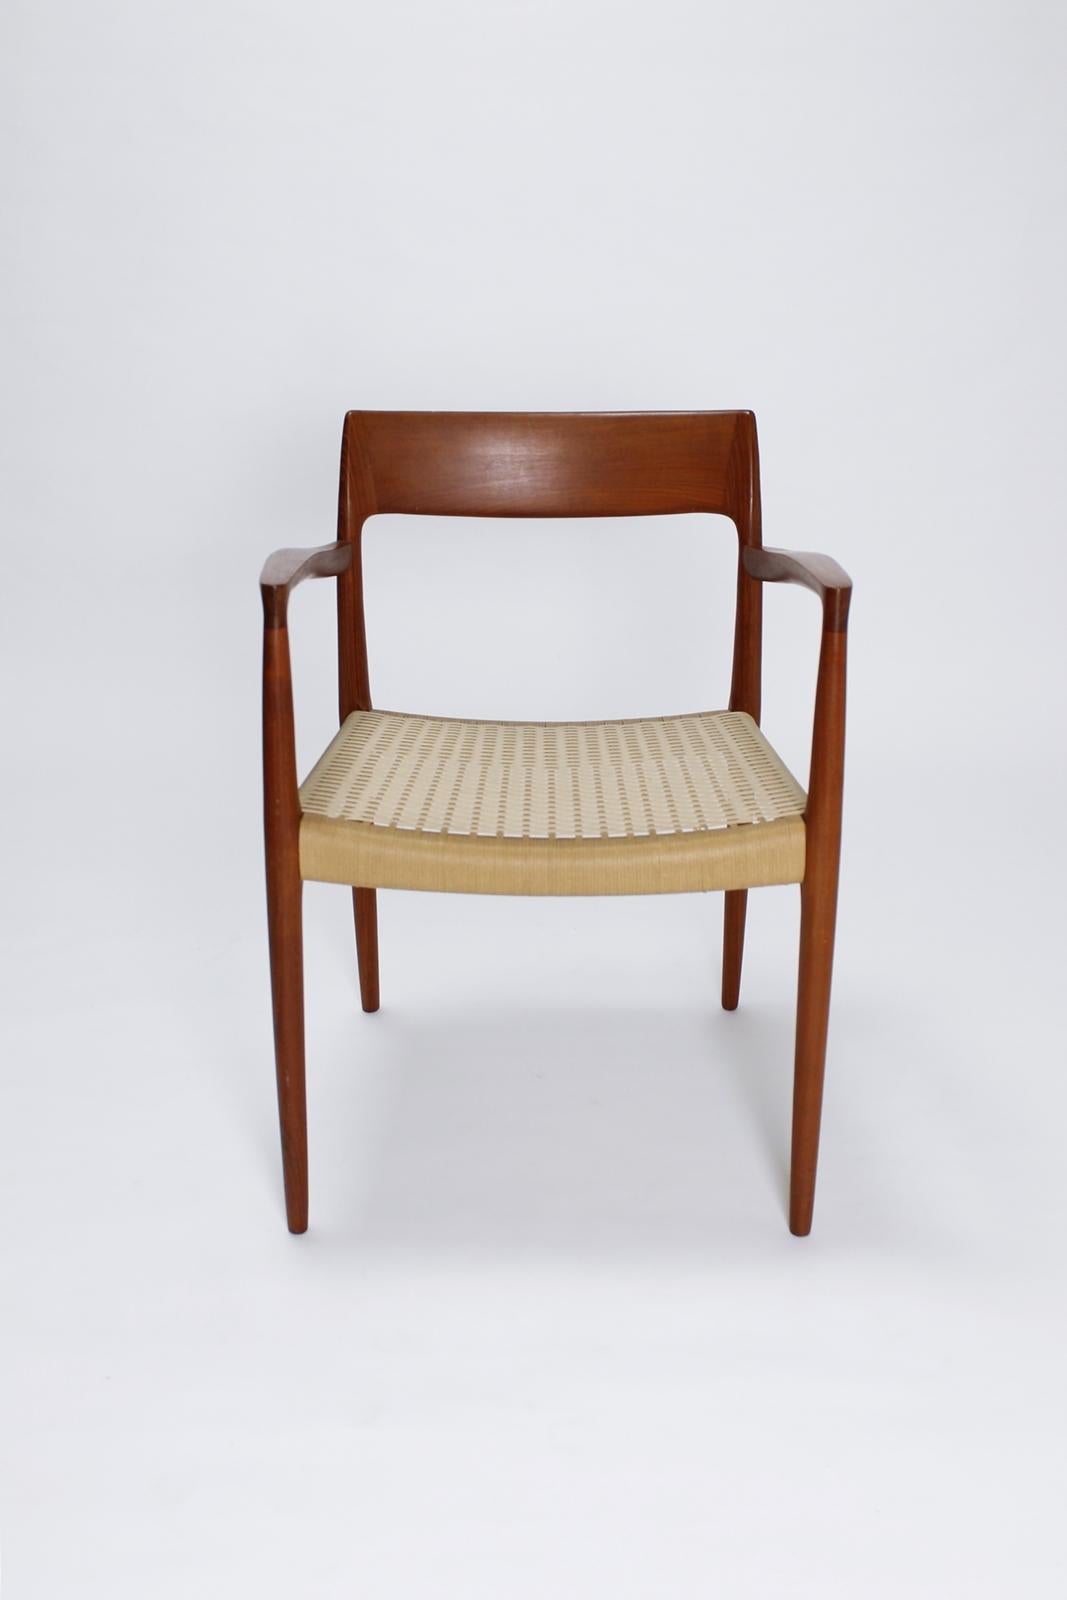 Papercord Mod. 57 Teak Armchair by Niels Otto Möller for J. L Mollers, 1960s